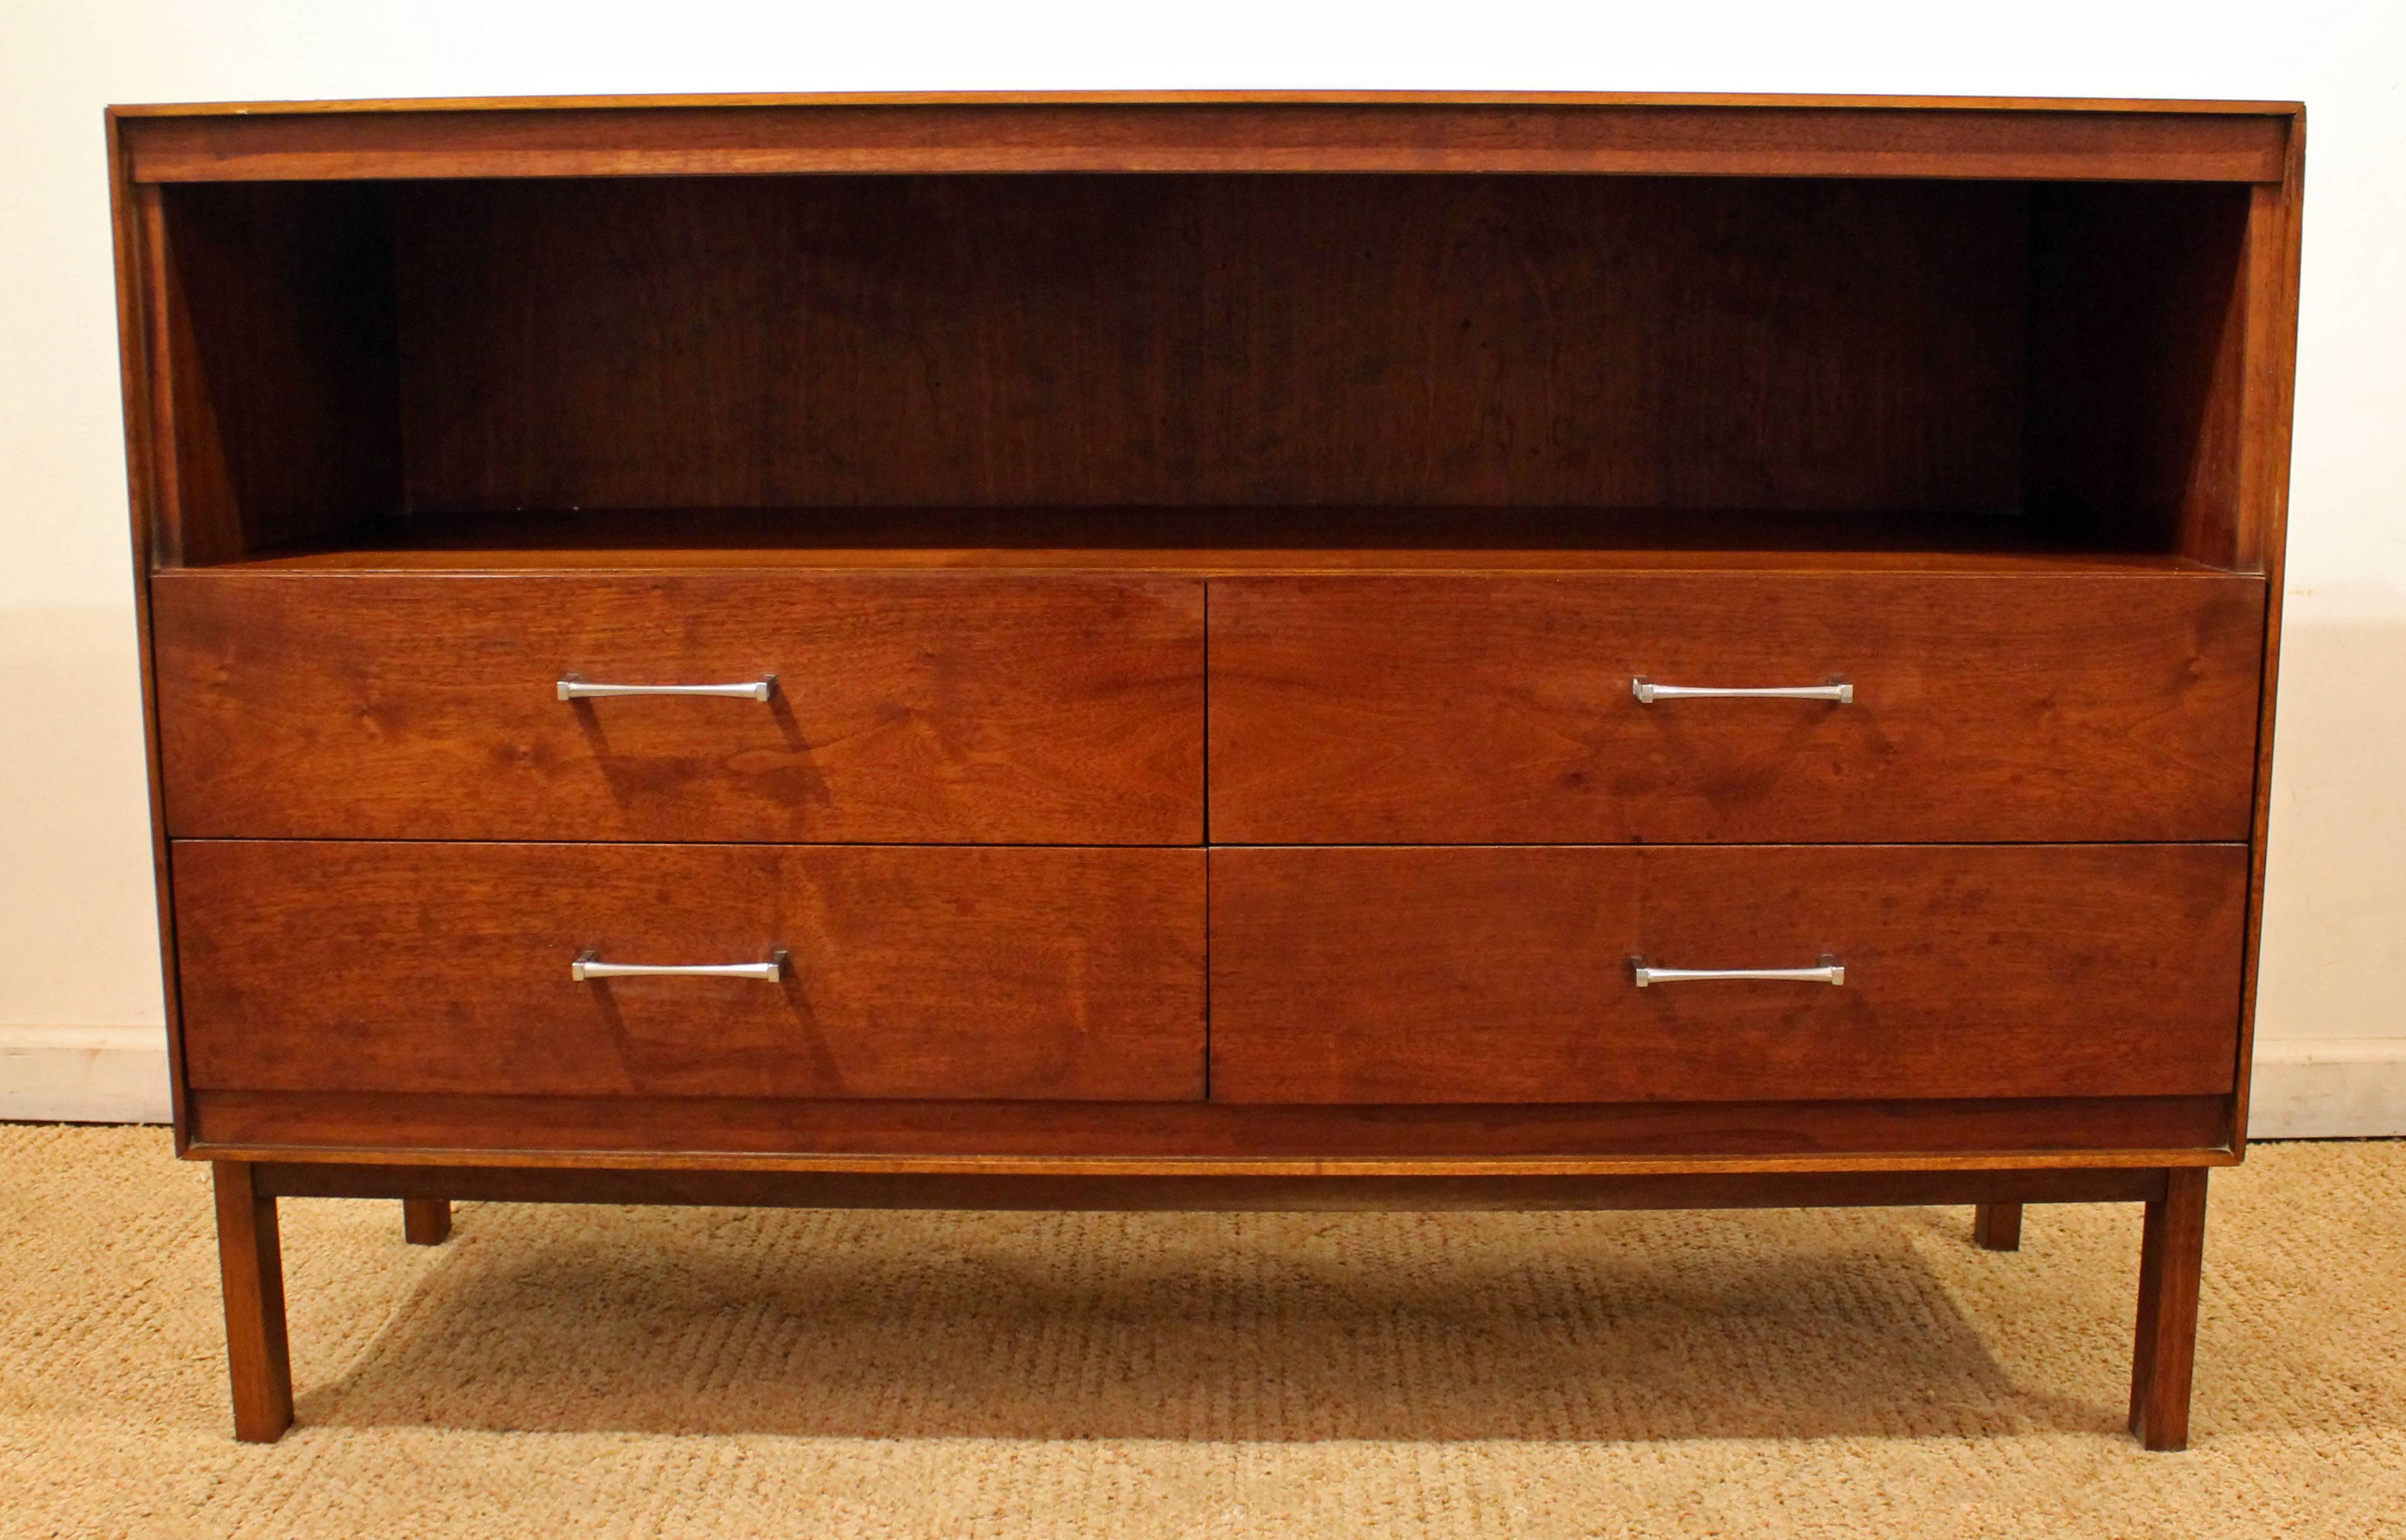 This piece looks to be walnut with dovetailed edges and chrome pulls. It is signed by Lane.

Dimensions:
48